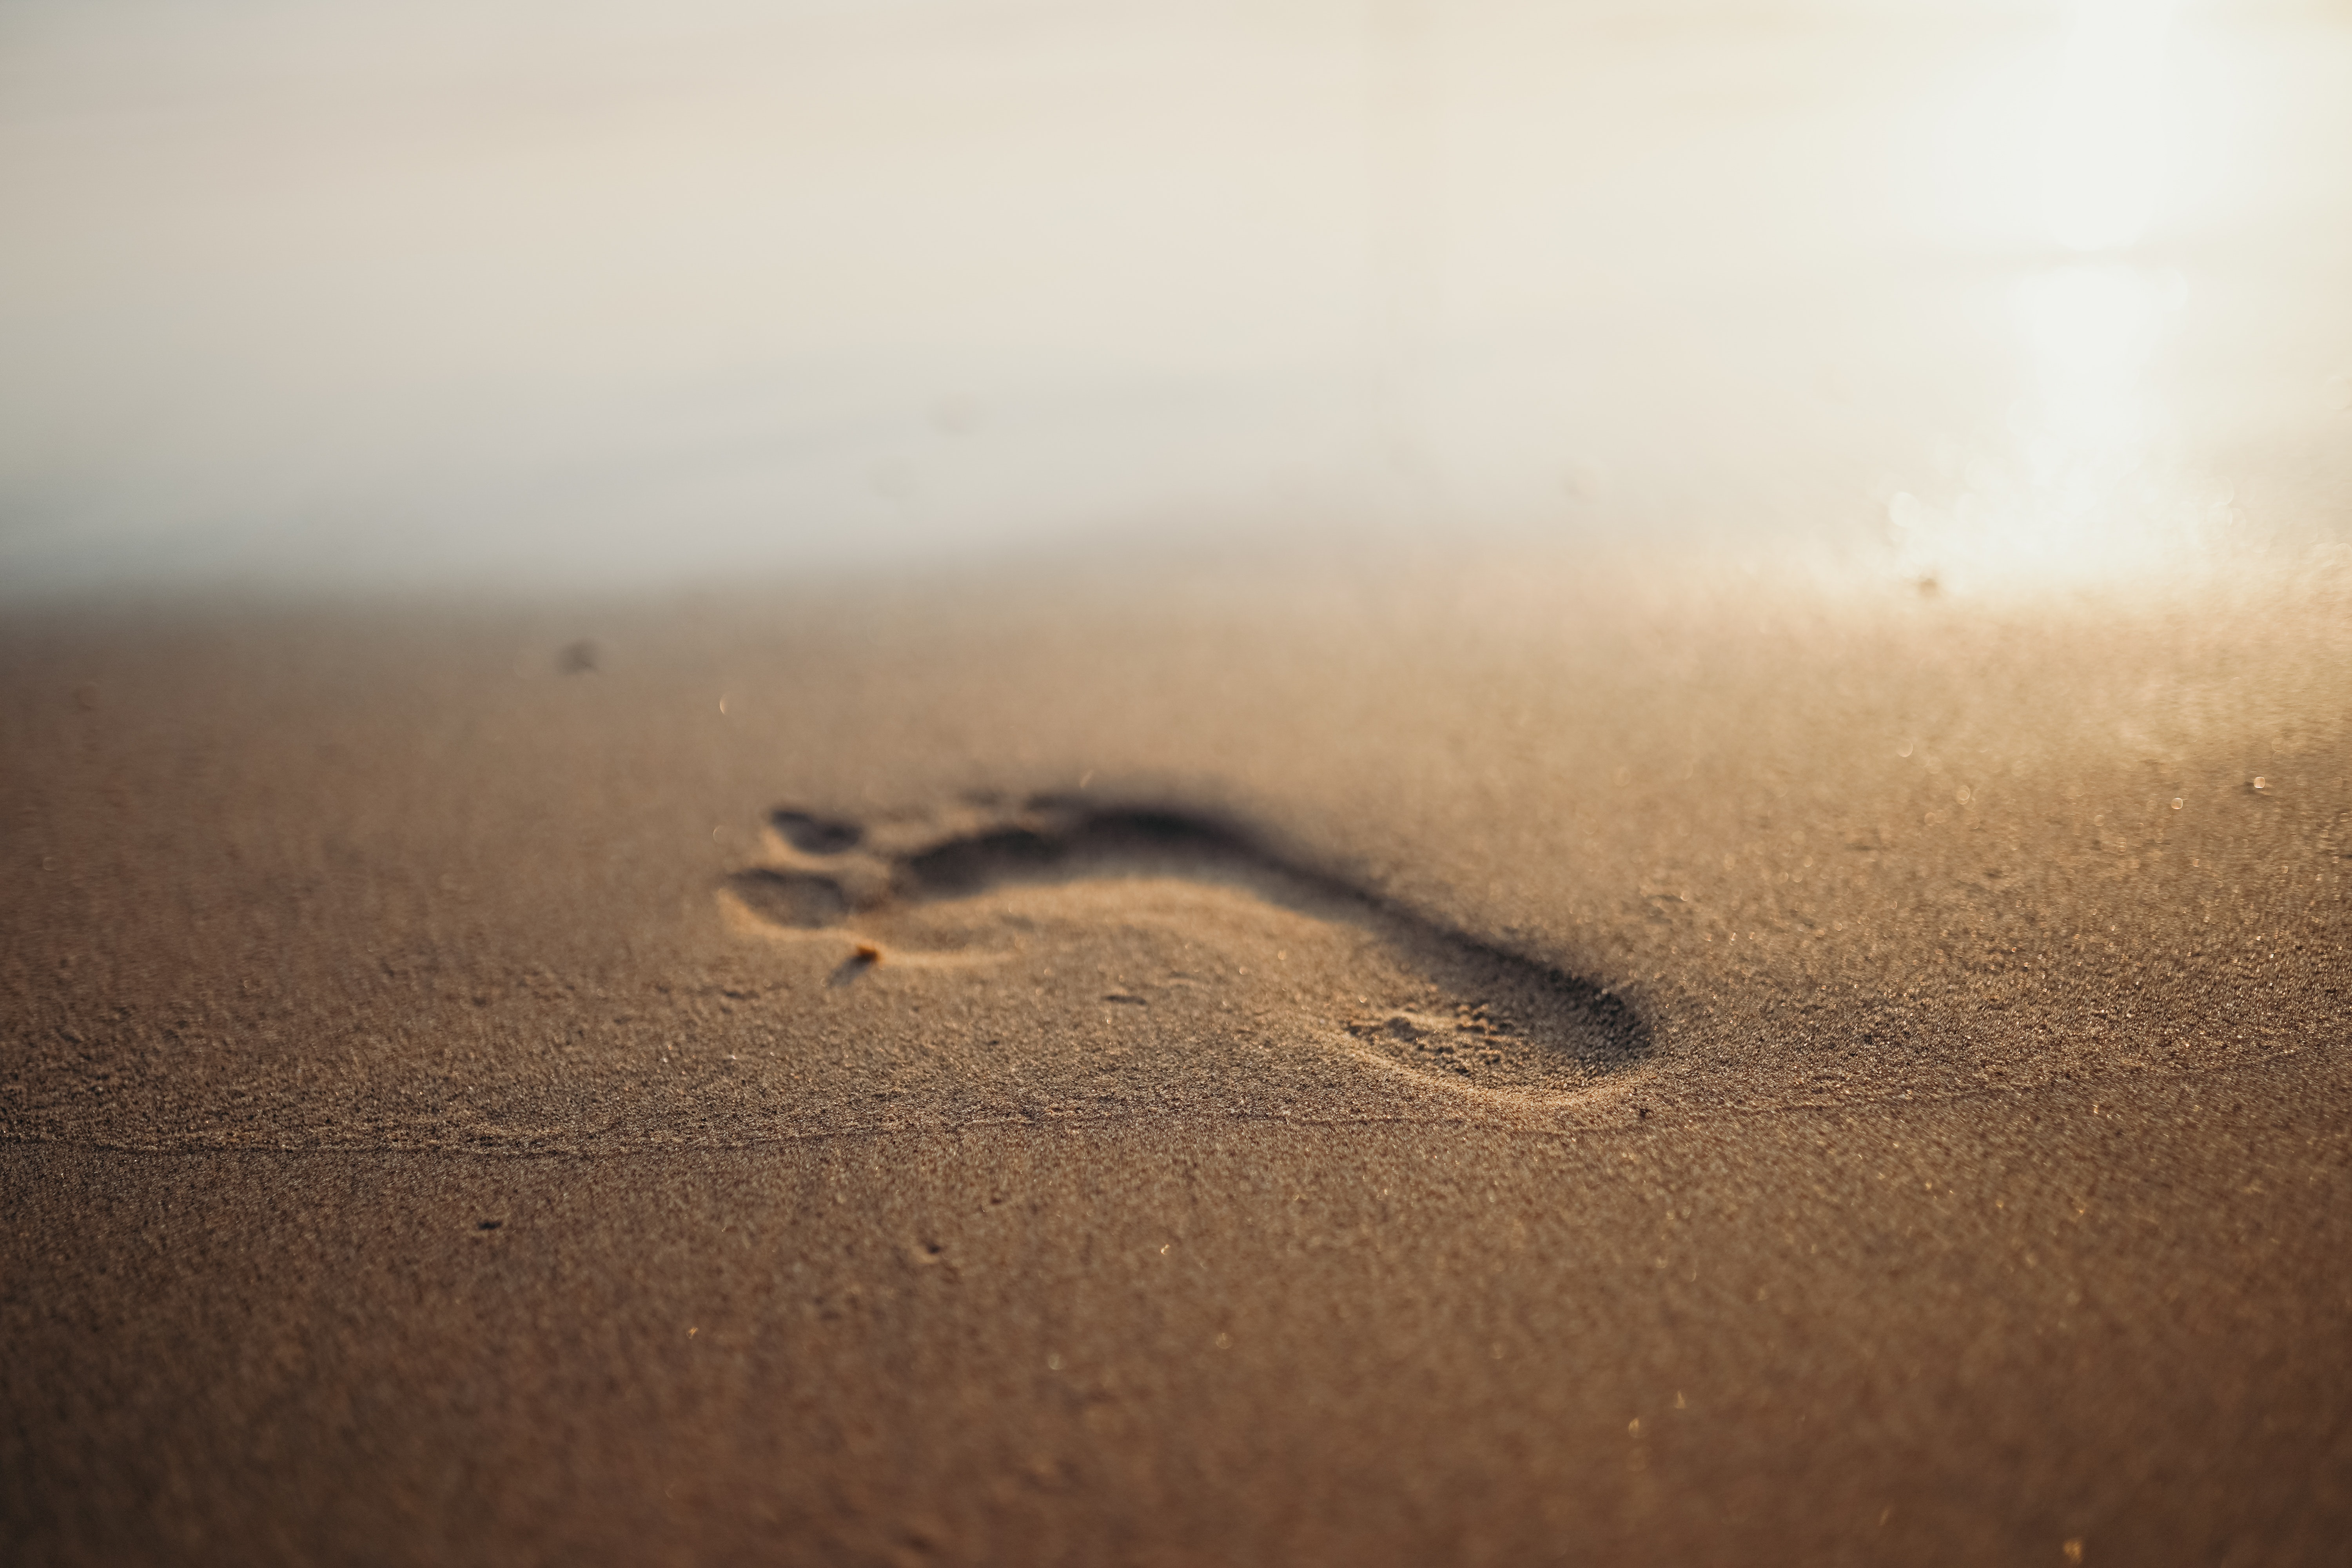 Footprints in the sand by cottonbro